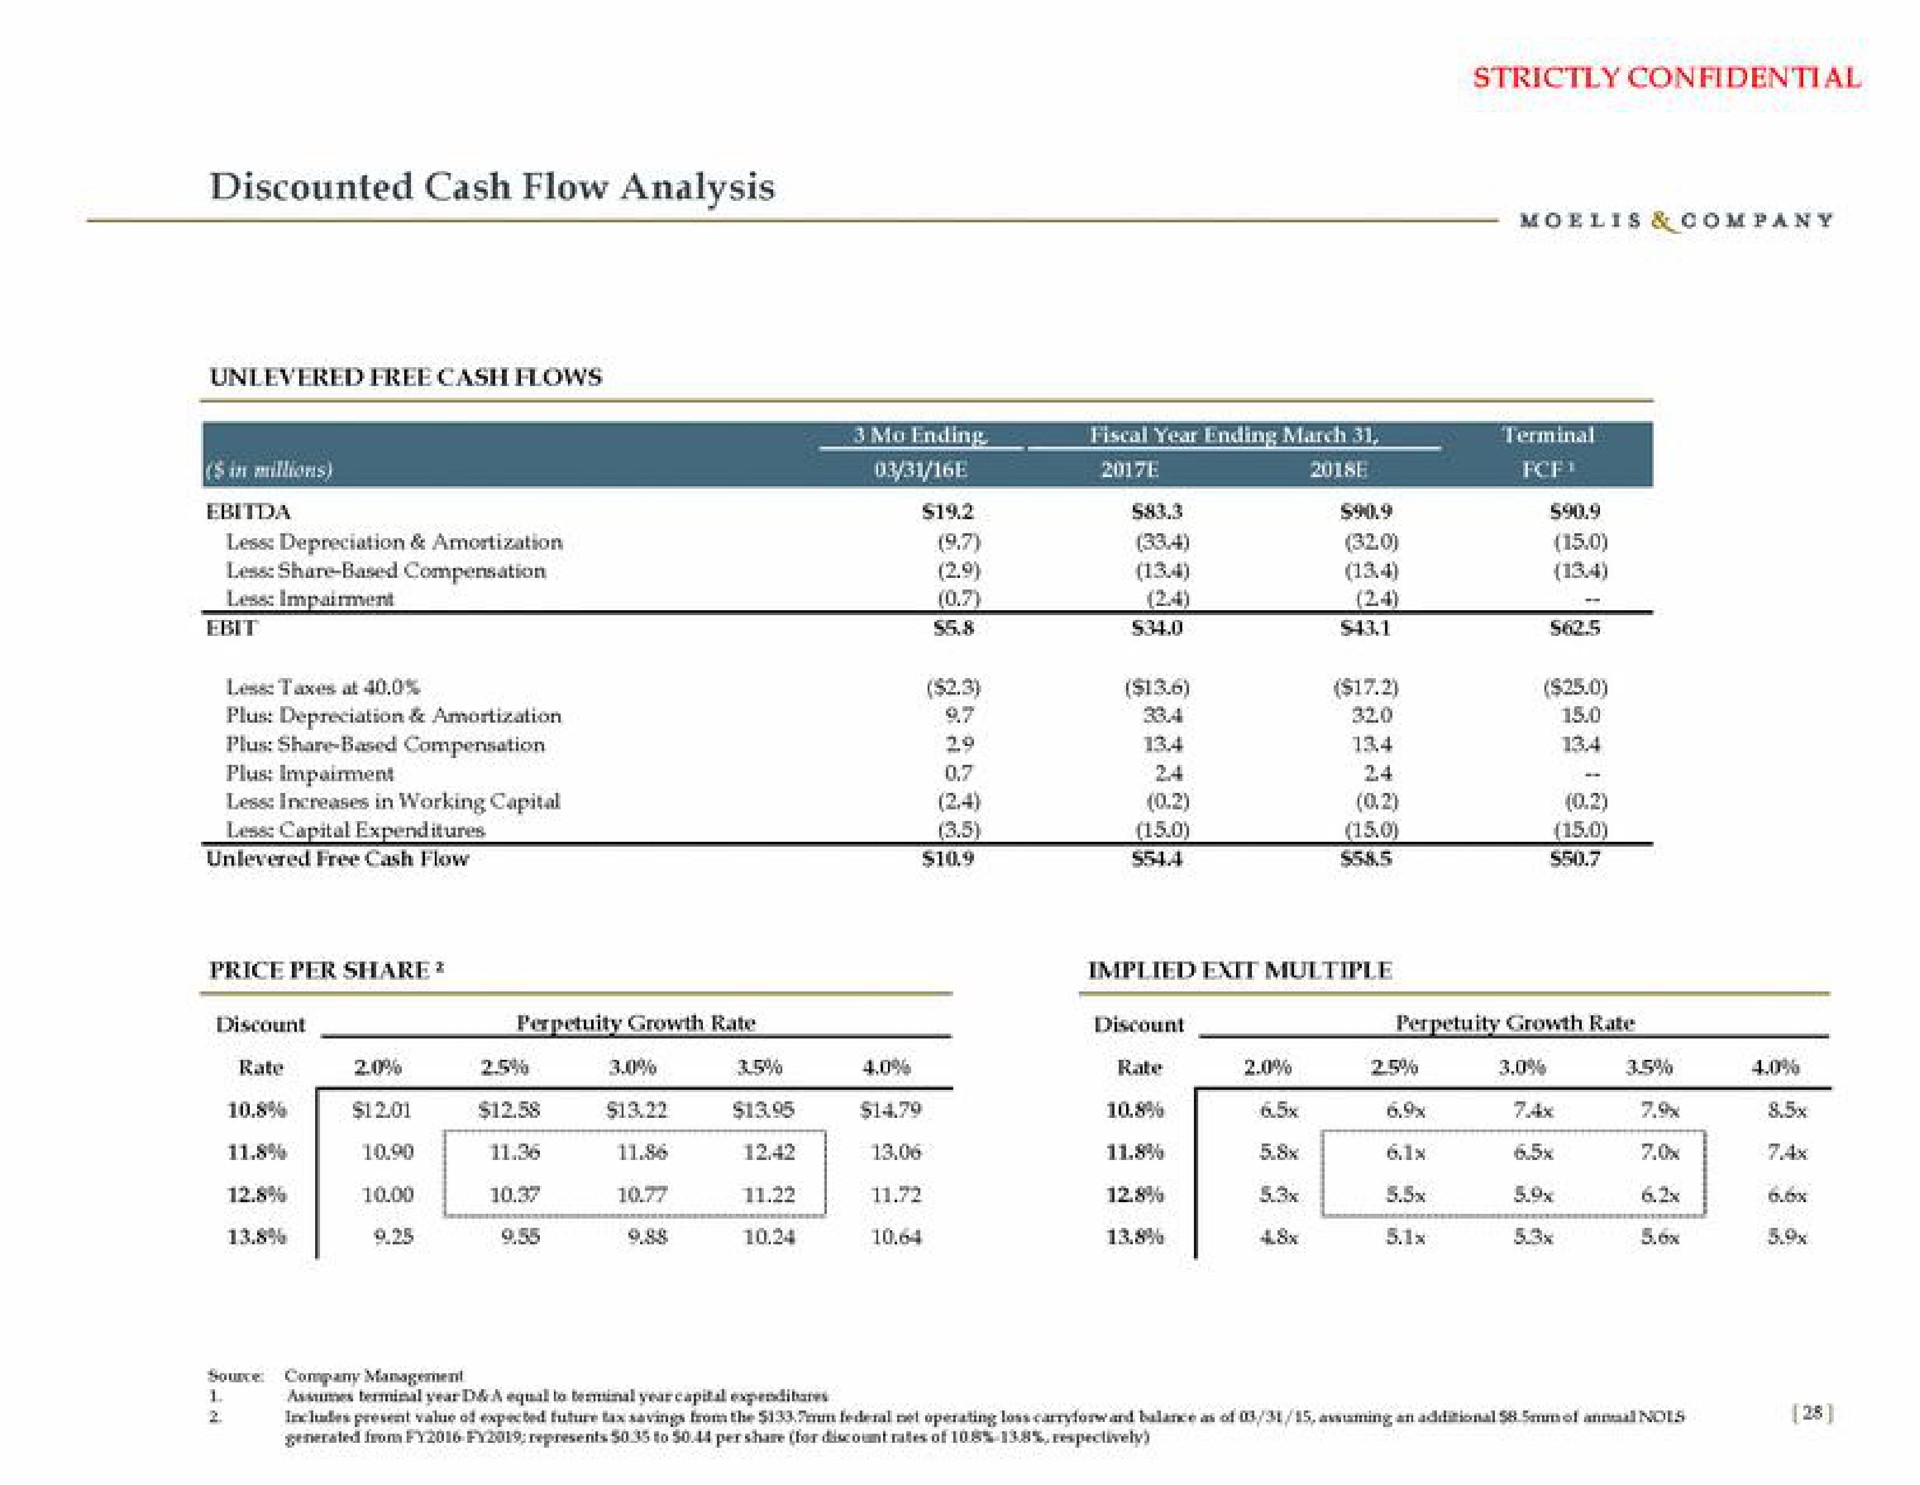 discounted cash flow analysis | Moelis & Company